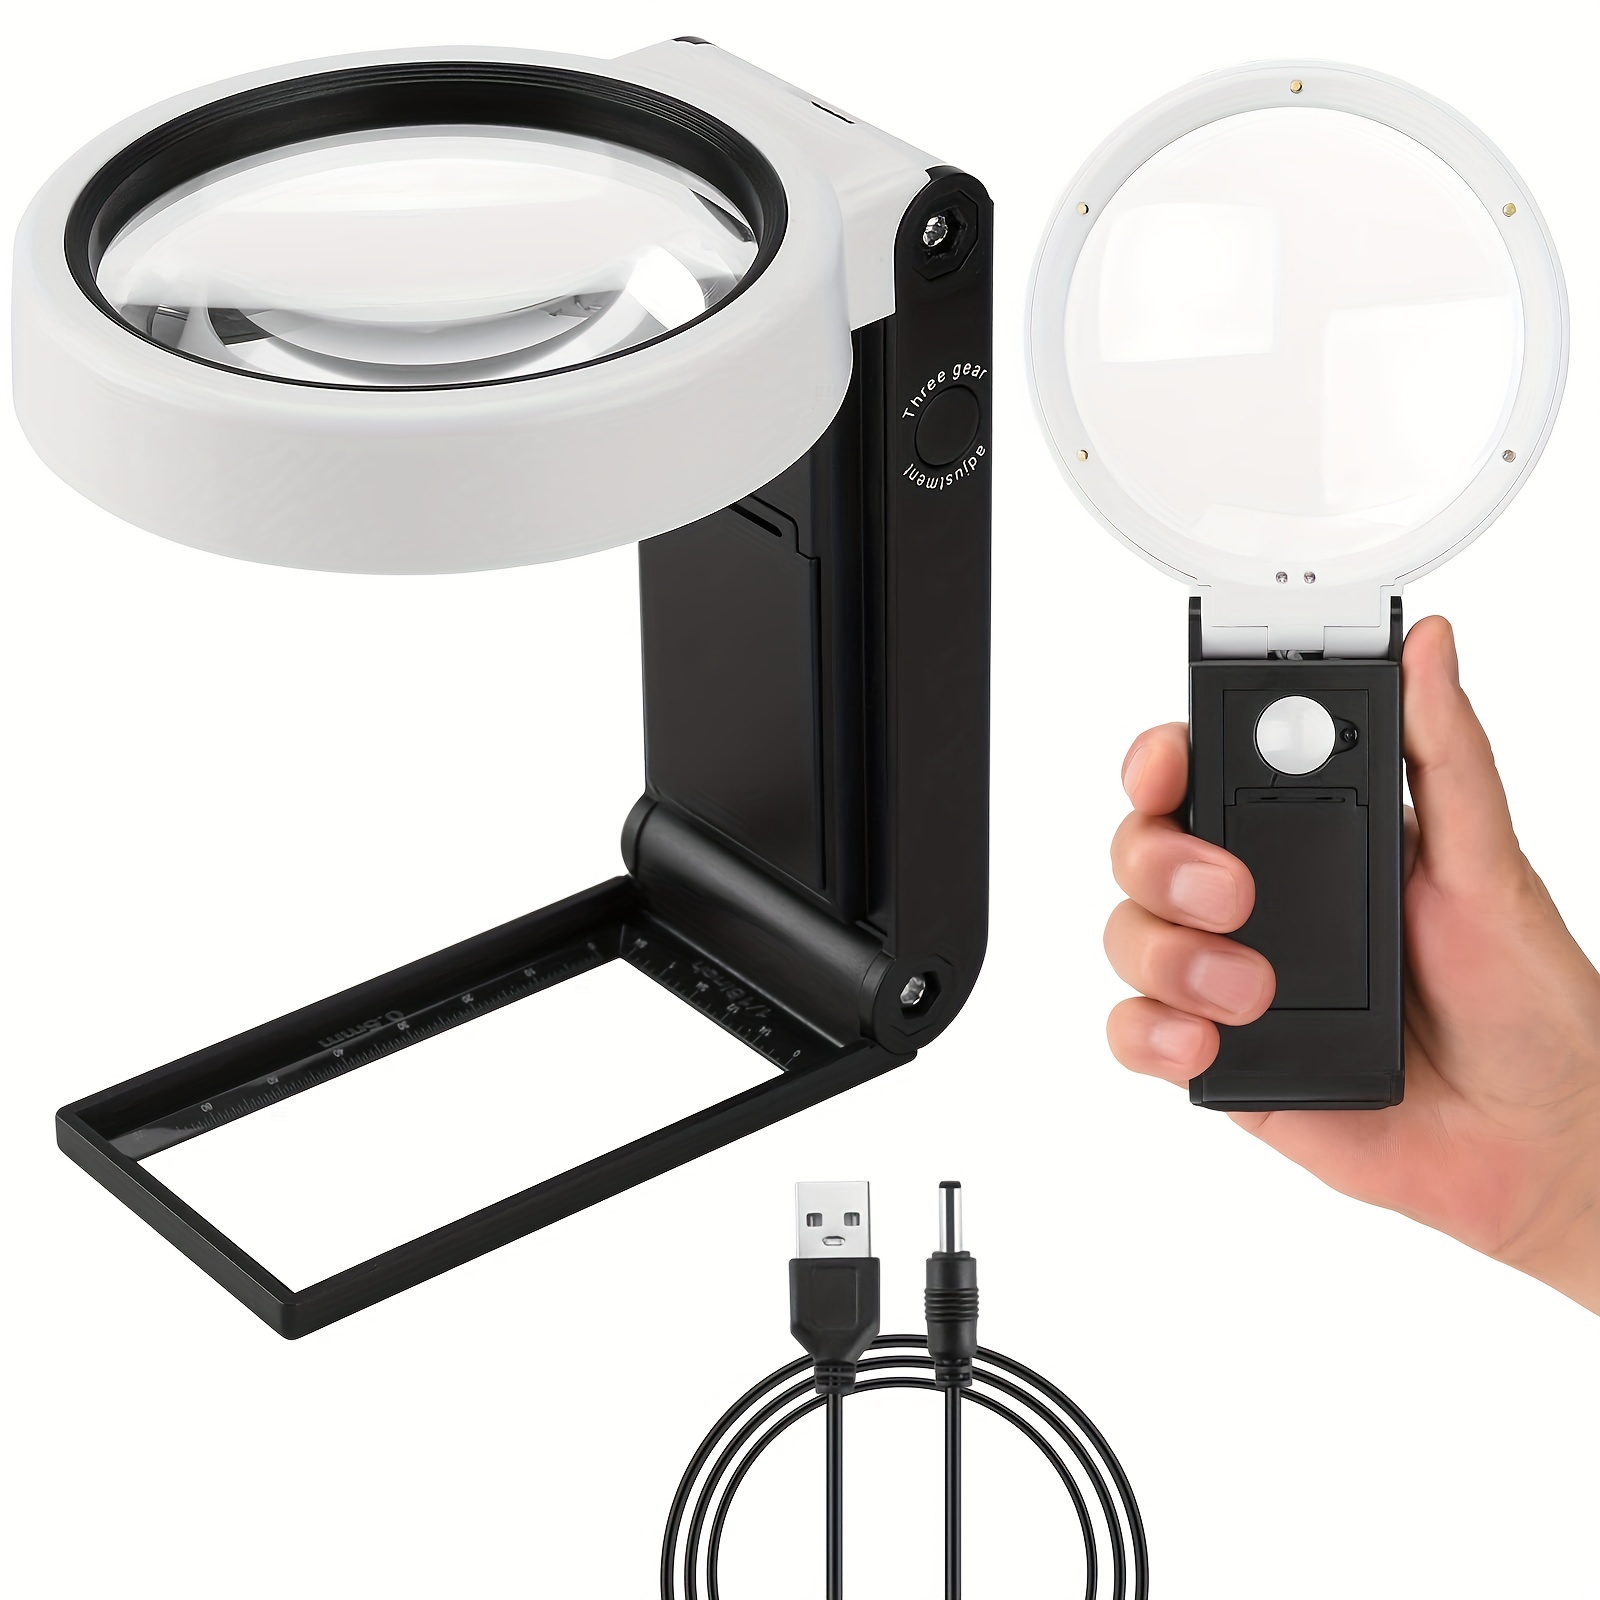 25X 6X Magnifying Glass With Light and Stand Folding Design LED Illuminated Magnifying Glass For Close Work Handheld Large Magnifying Glasses For Reading Powered By Battery Or USB